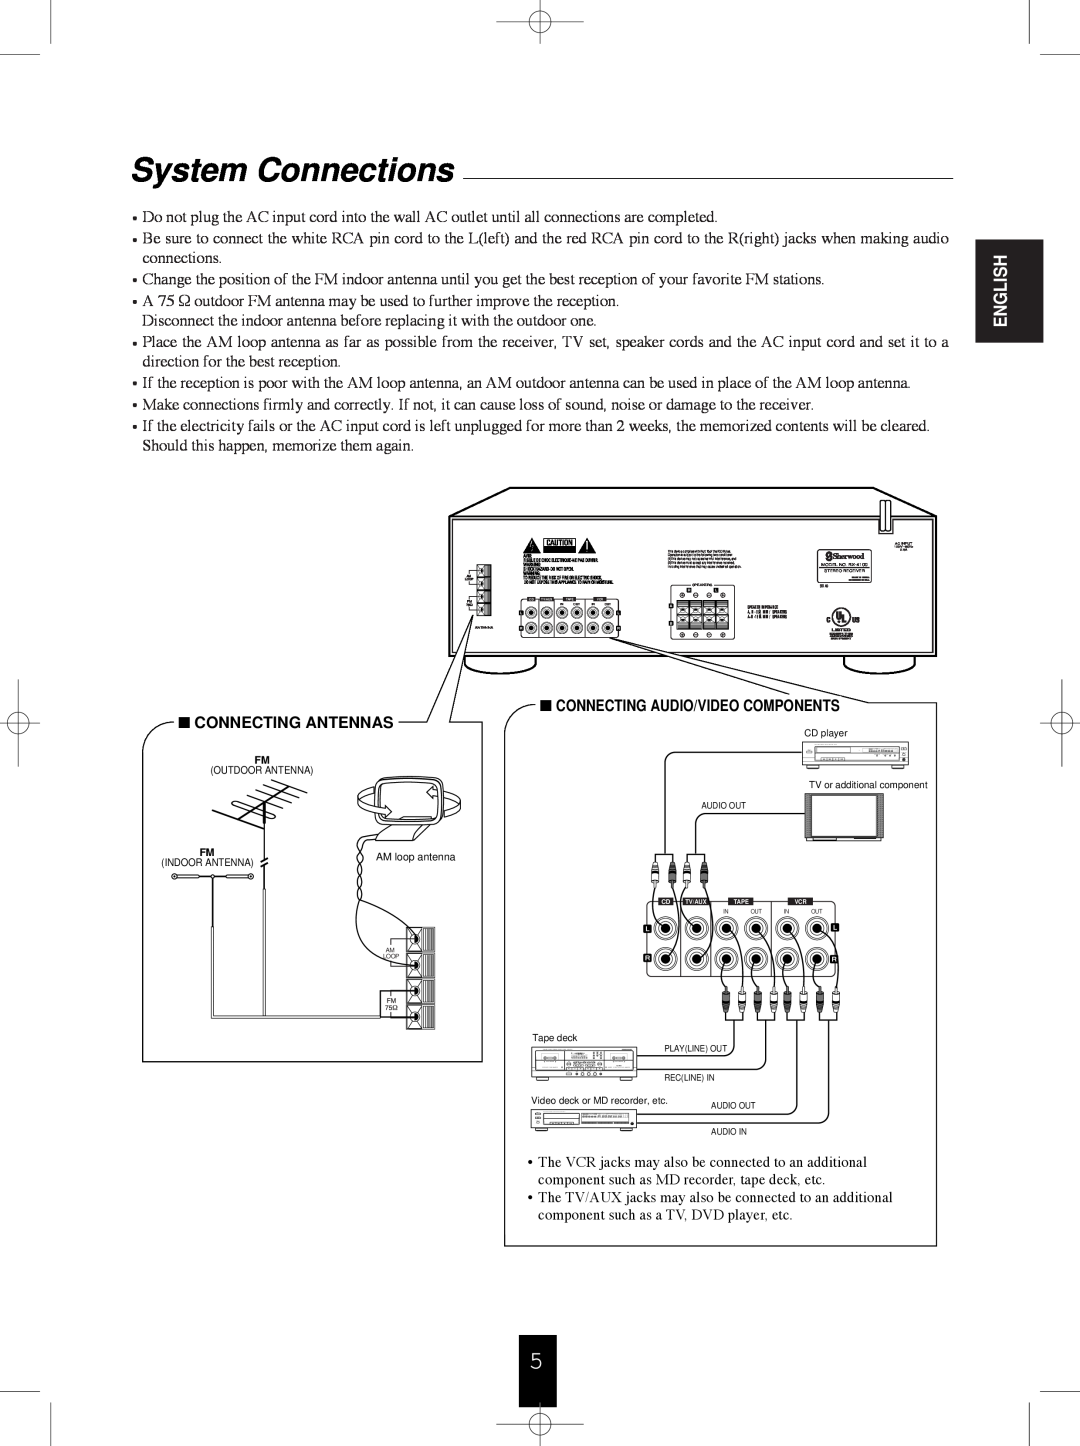 Sherwood RX-4100 manual System Connections, English, Connecting Audio/Video Components, Connecting Antennas 